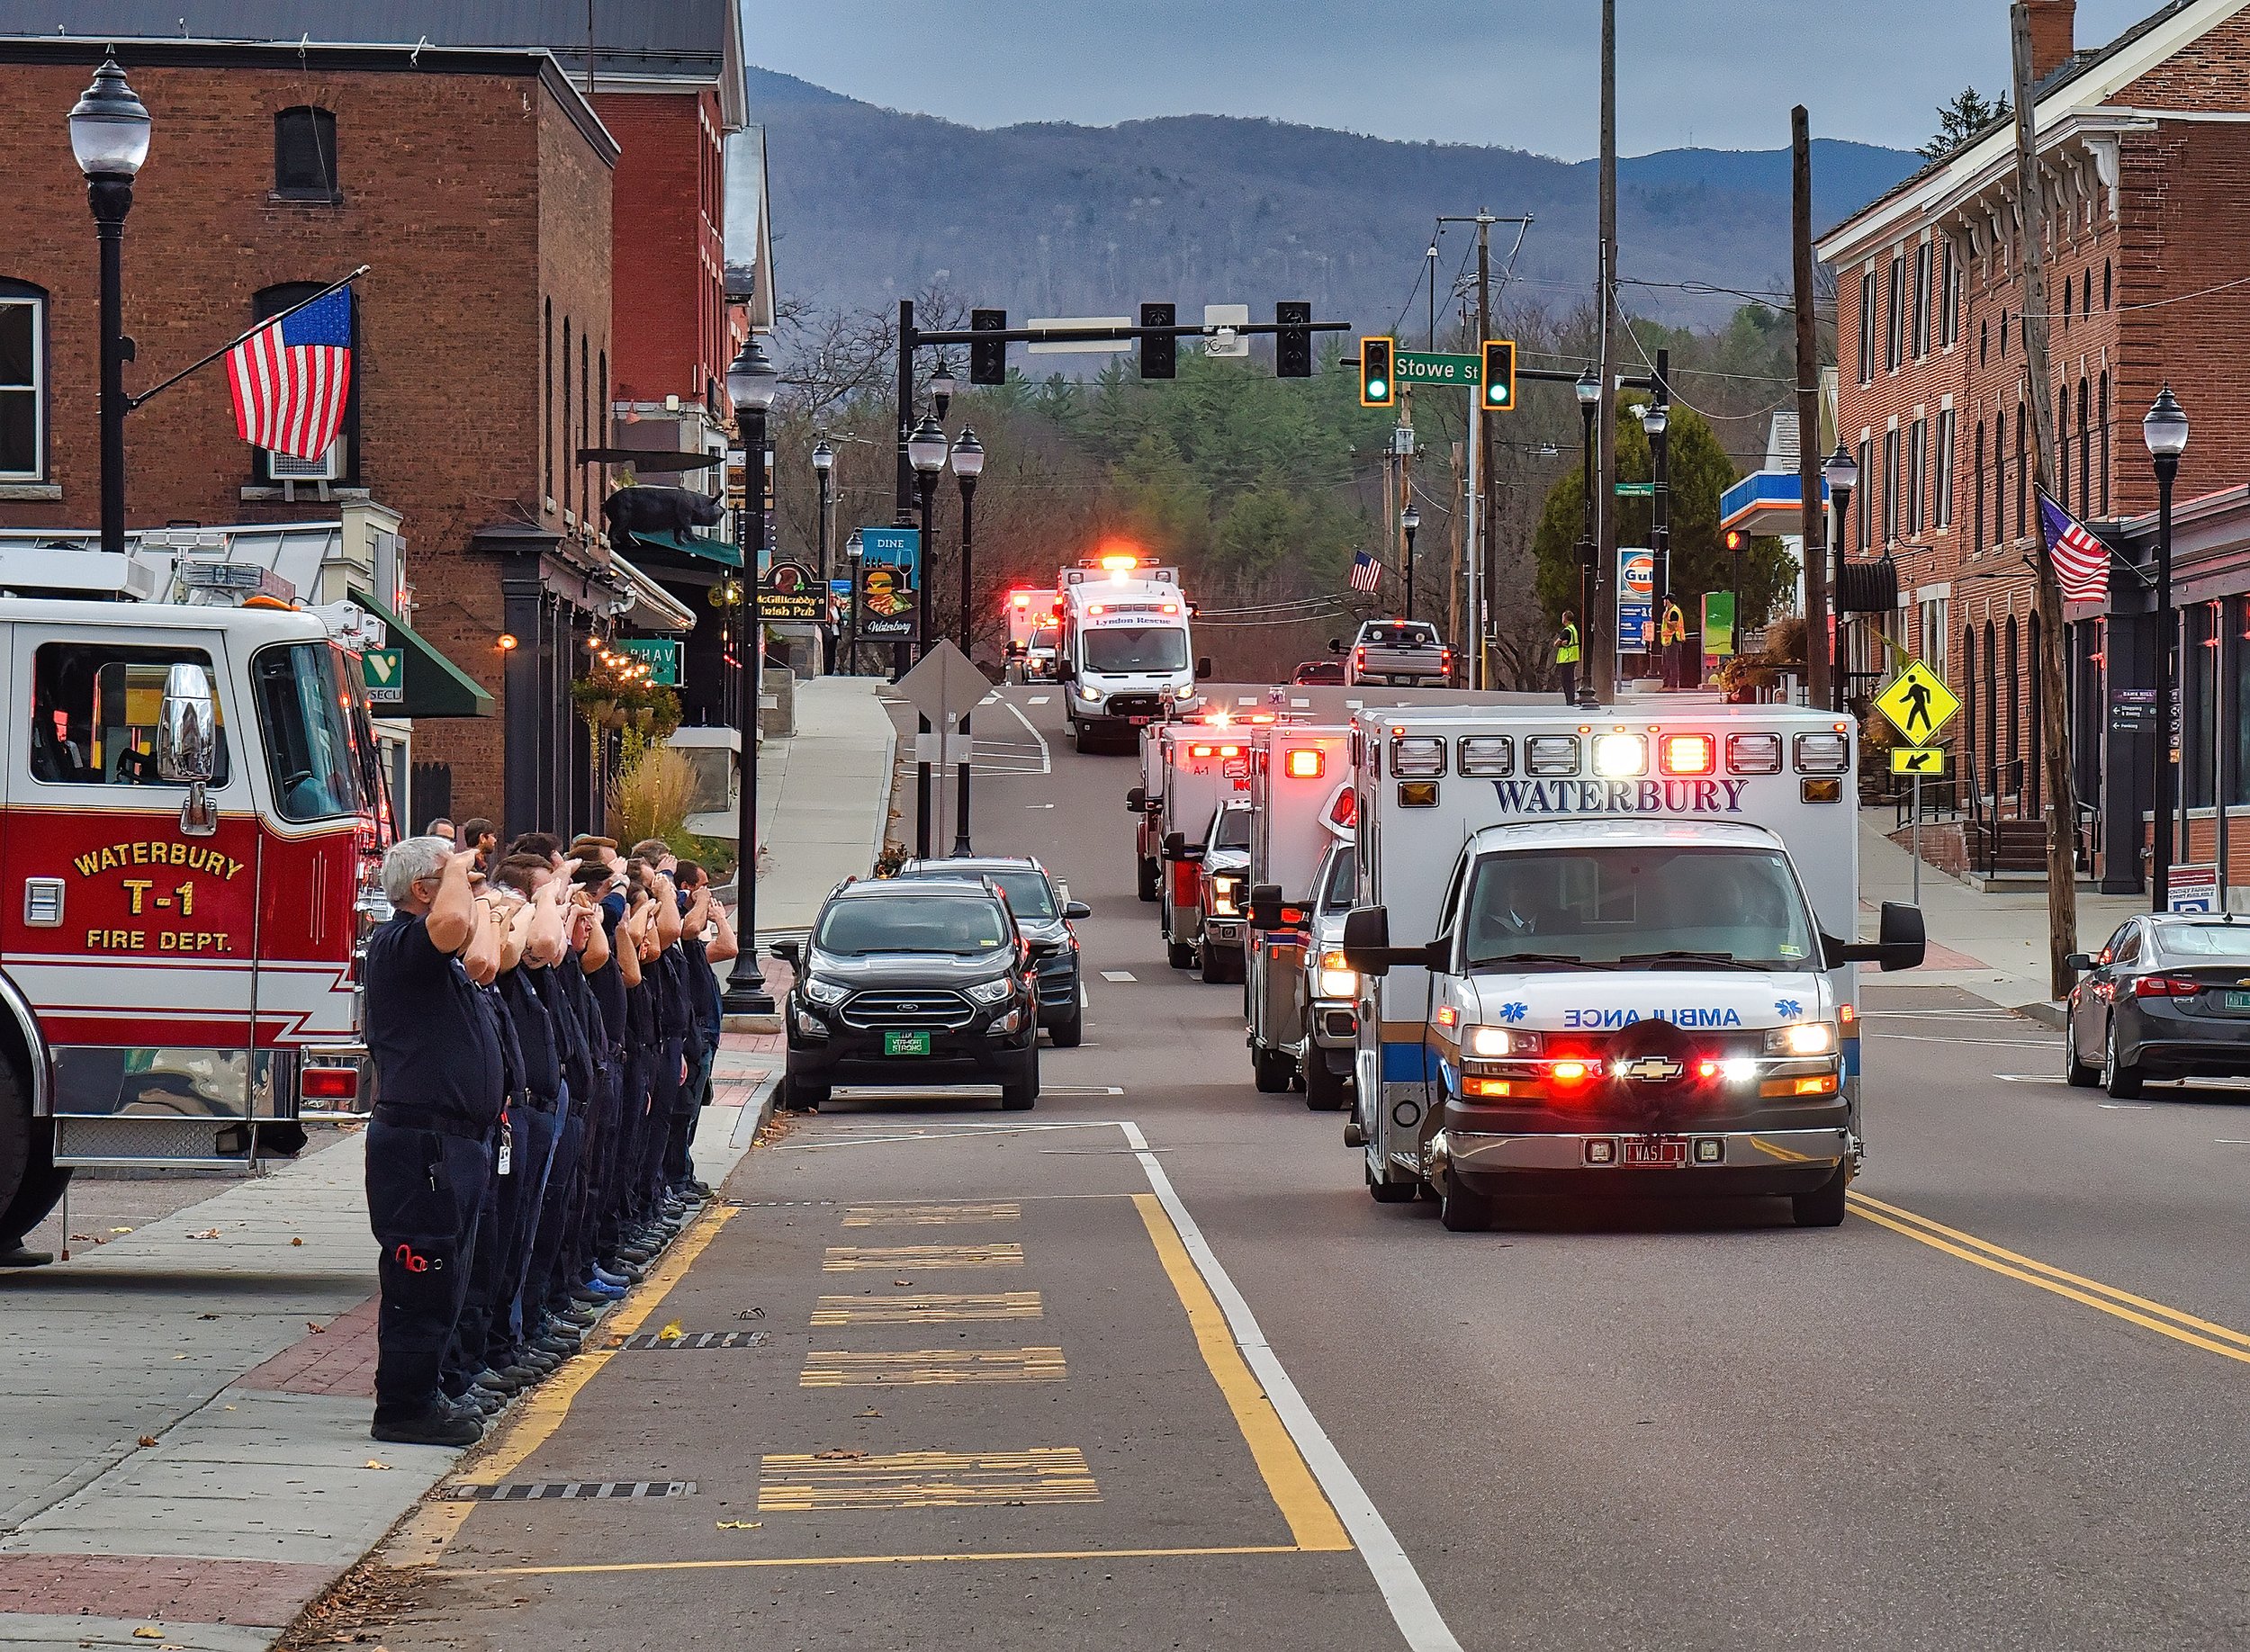  The procession makes its way down Main Street. Photo by Gordon Miller 